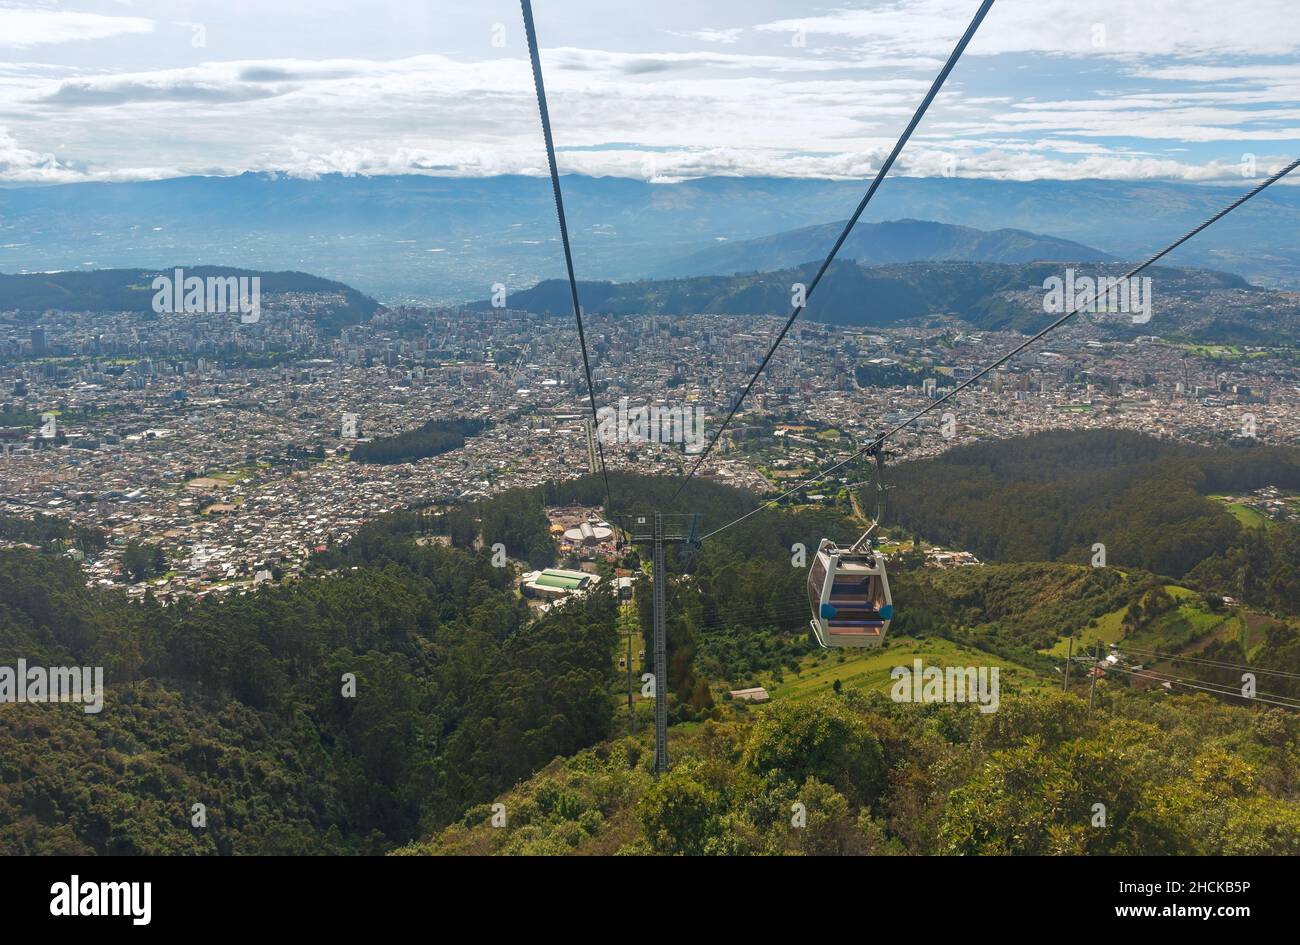 Cable car system on the Pichincha volcano named Teleferiqo with the skyline of Quito, Ecuador. Stock Photo